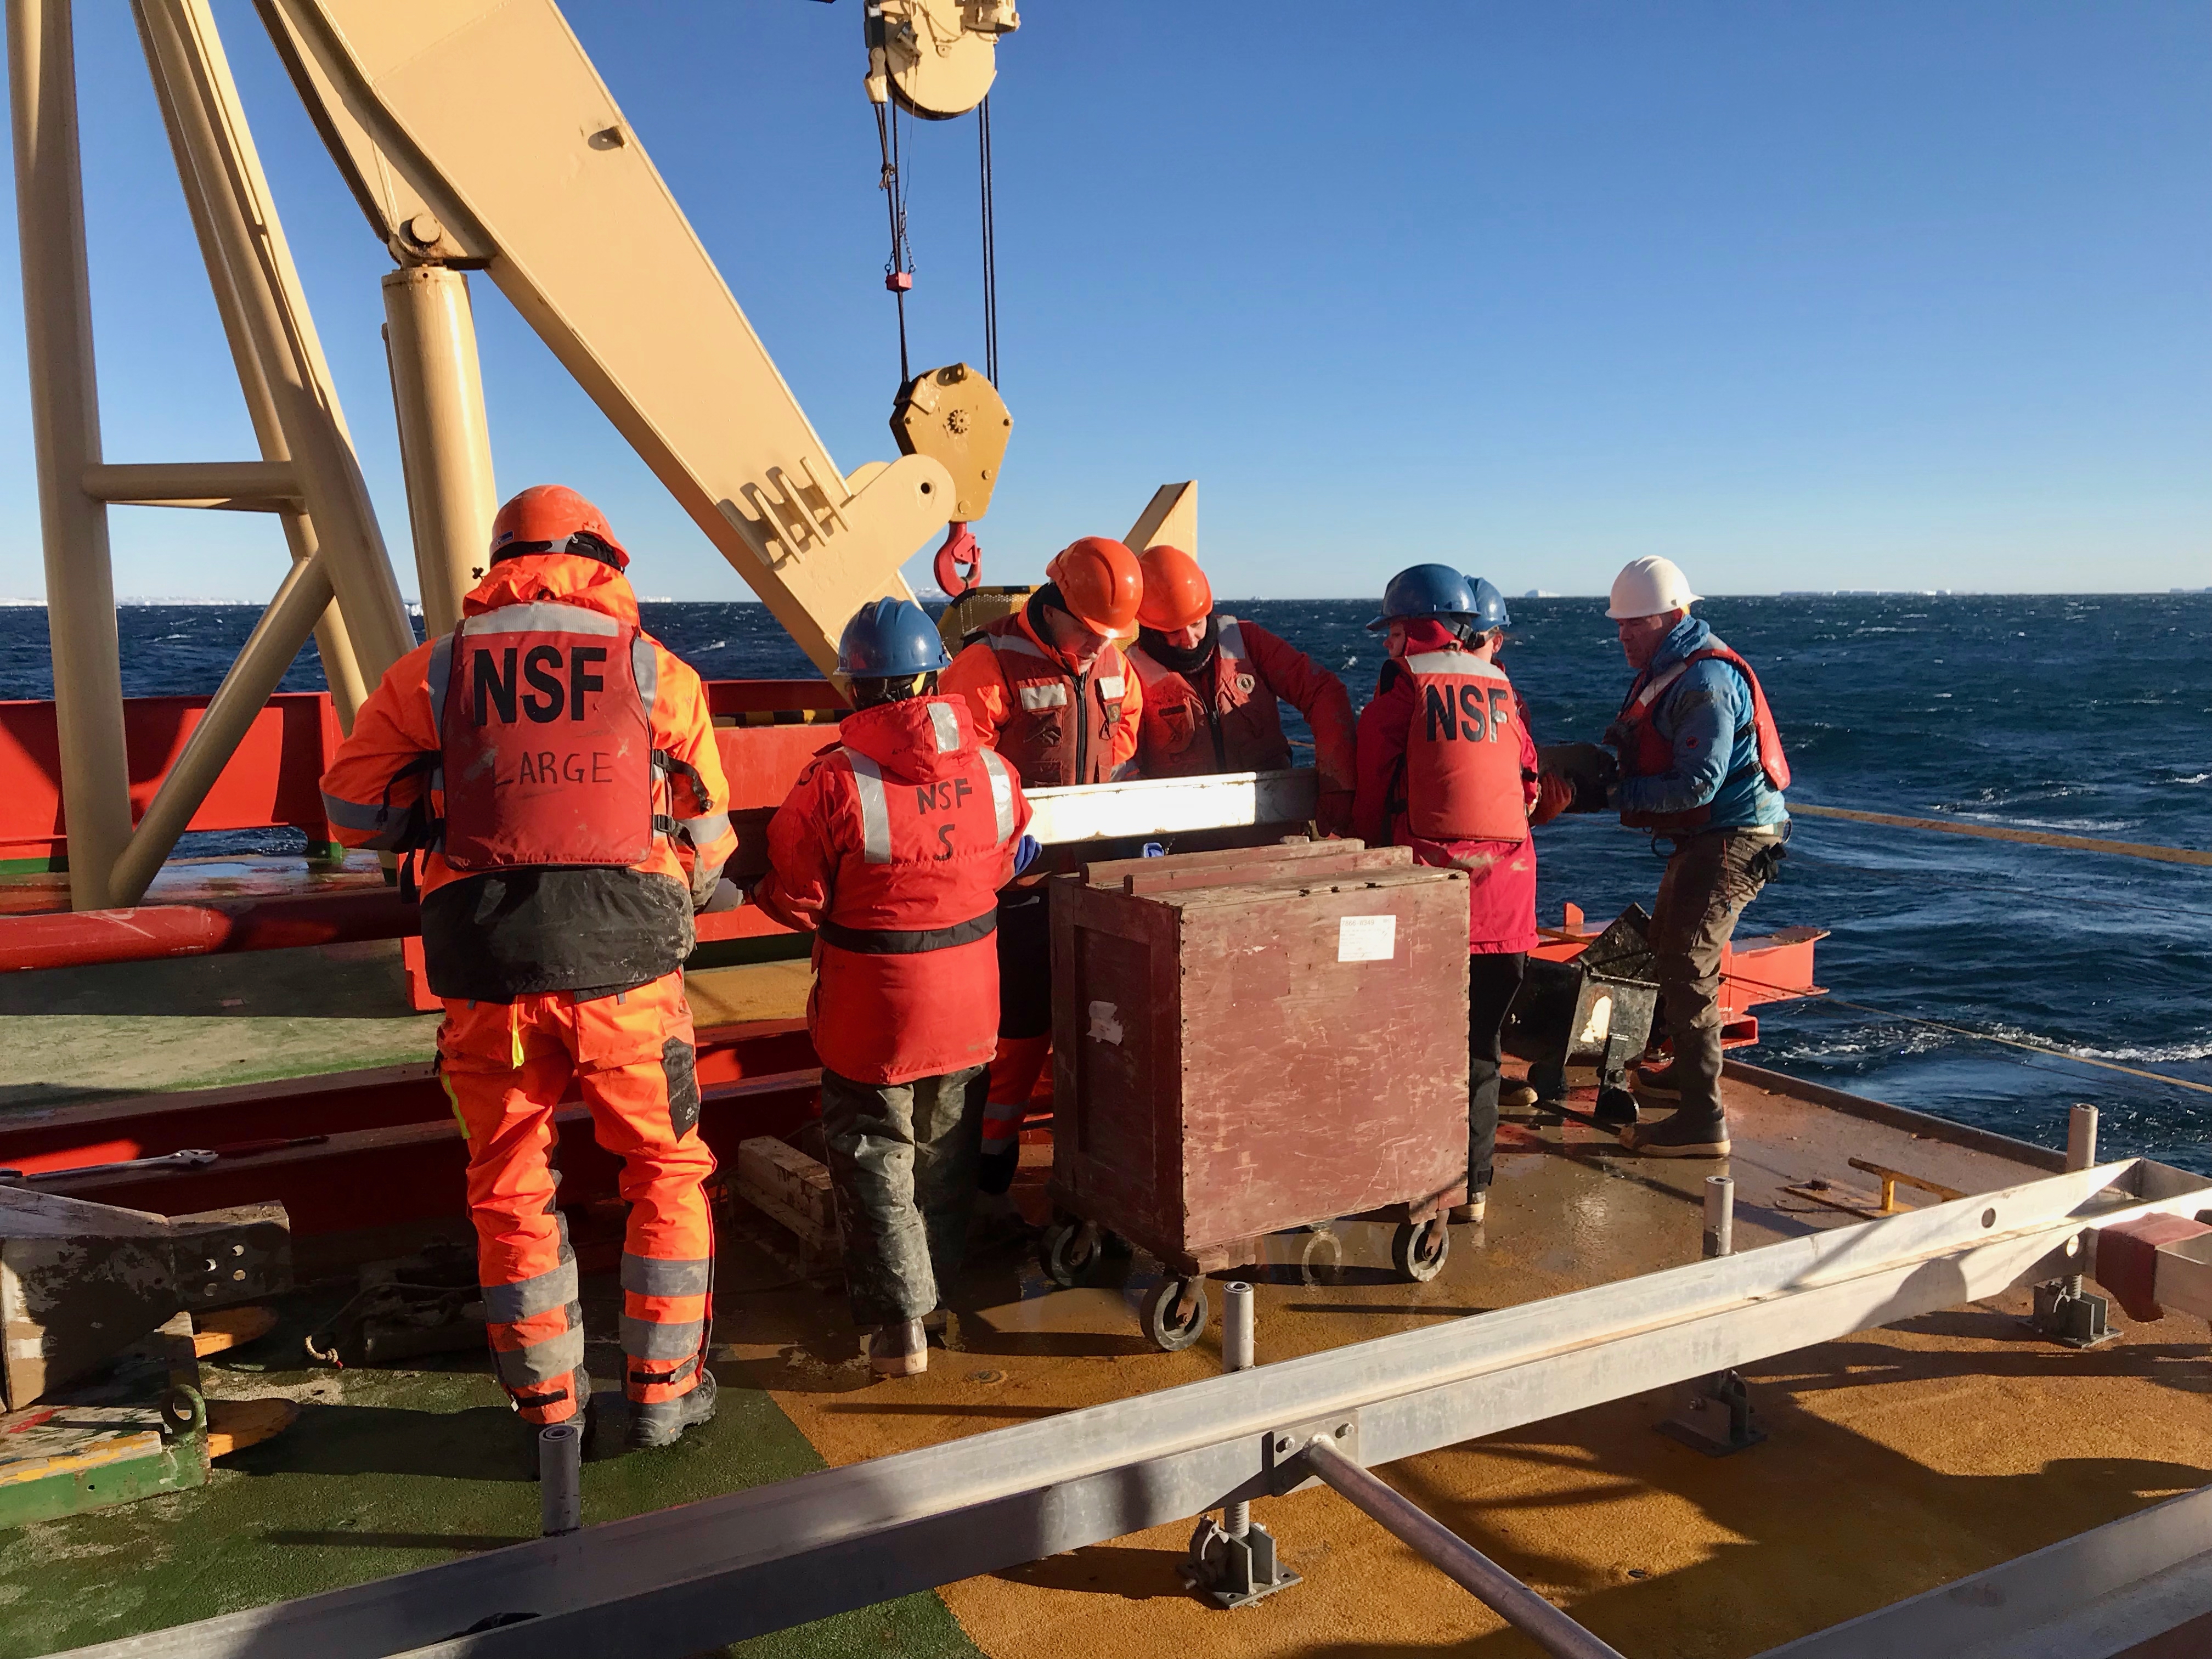 The THOR team lifts the Kasten core from the deck onto the trolley to bring it inside the ship where it will be completely opened and the sediments sampled (from left to right: James Kirkham, Victoria Fitzgerald, Rob Larter, Kelly Hogan, Rachel Clark, Becky Minzoni, and Jack Greenberg).